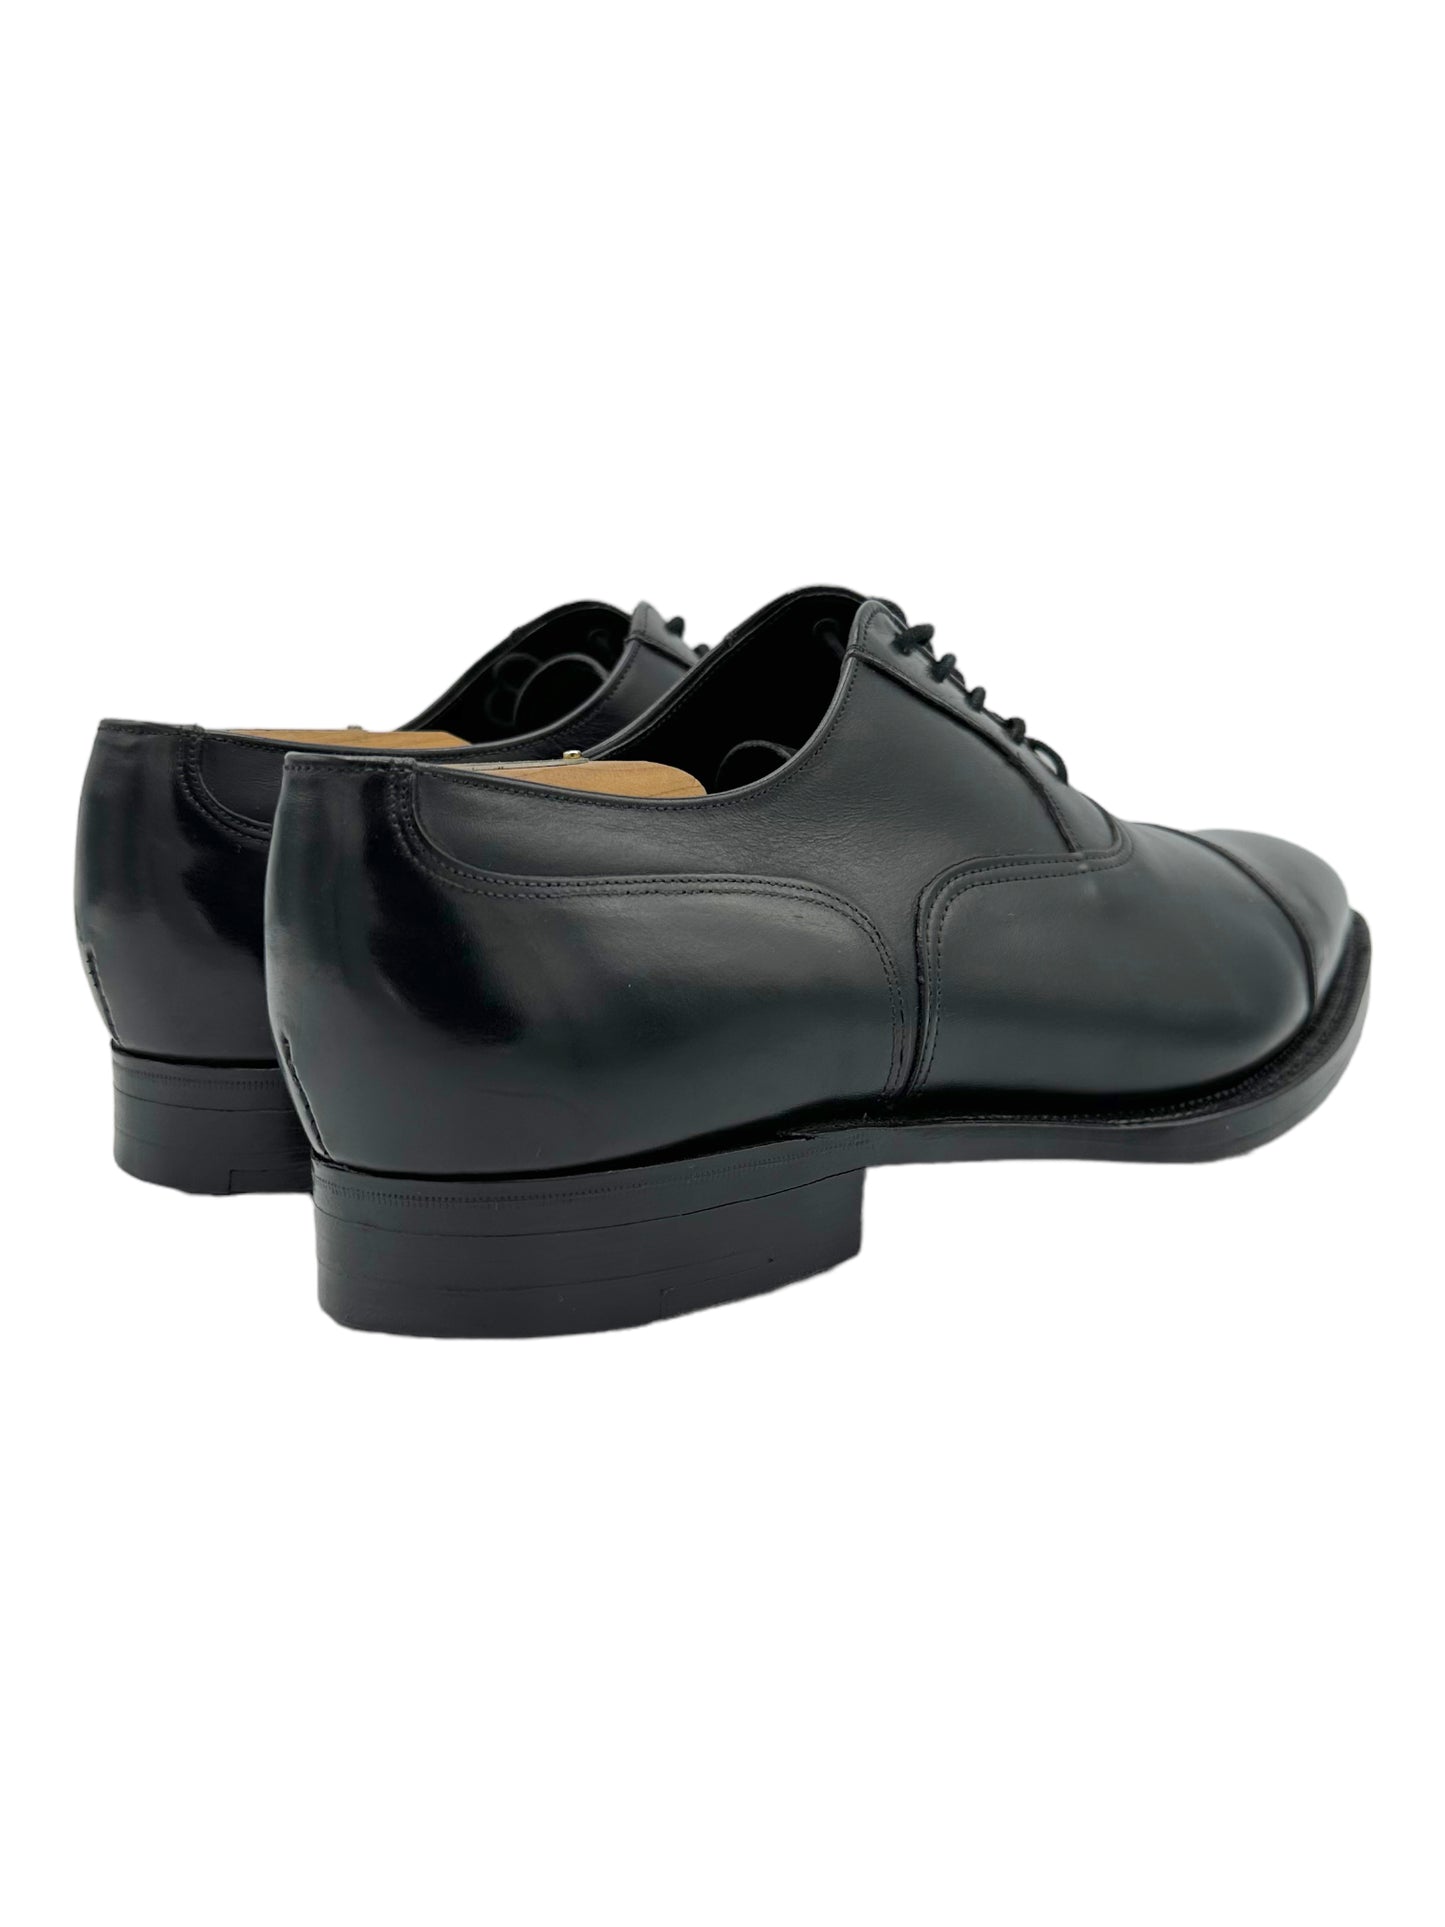 Alfred Sargent Black Cap Toe Oxford Dress Shoes - Genuine Design Luxury Consignment. New & Pre-Owned Clothing, Shoes, & Accessories. Calgary, Canada